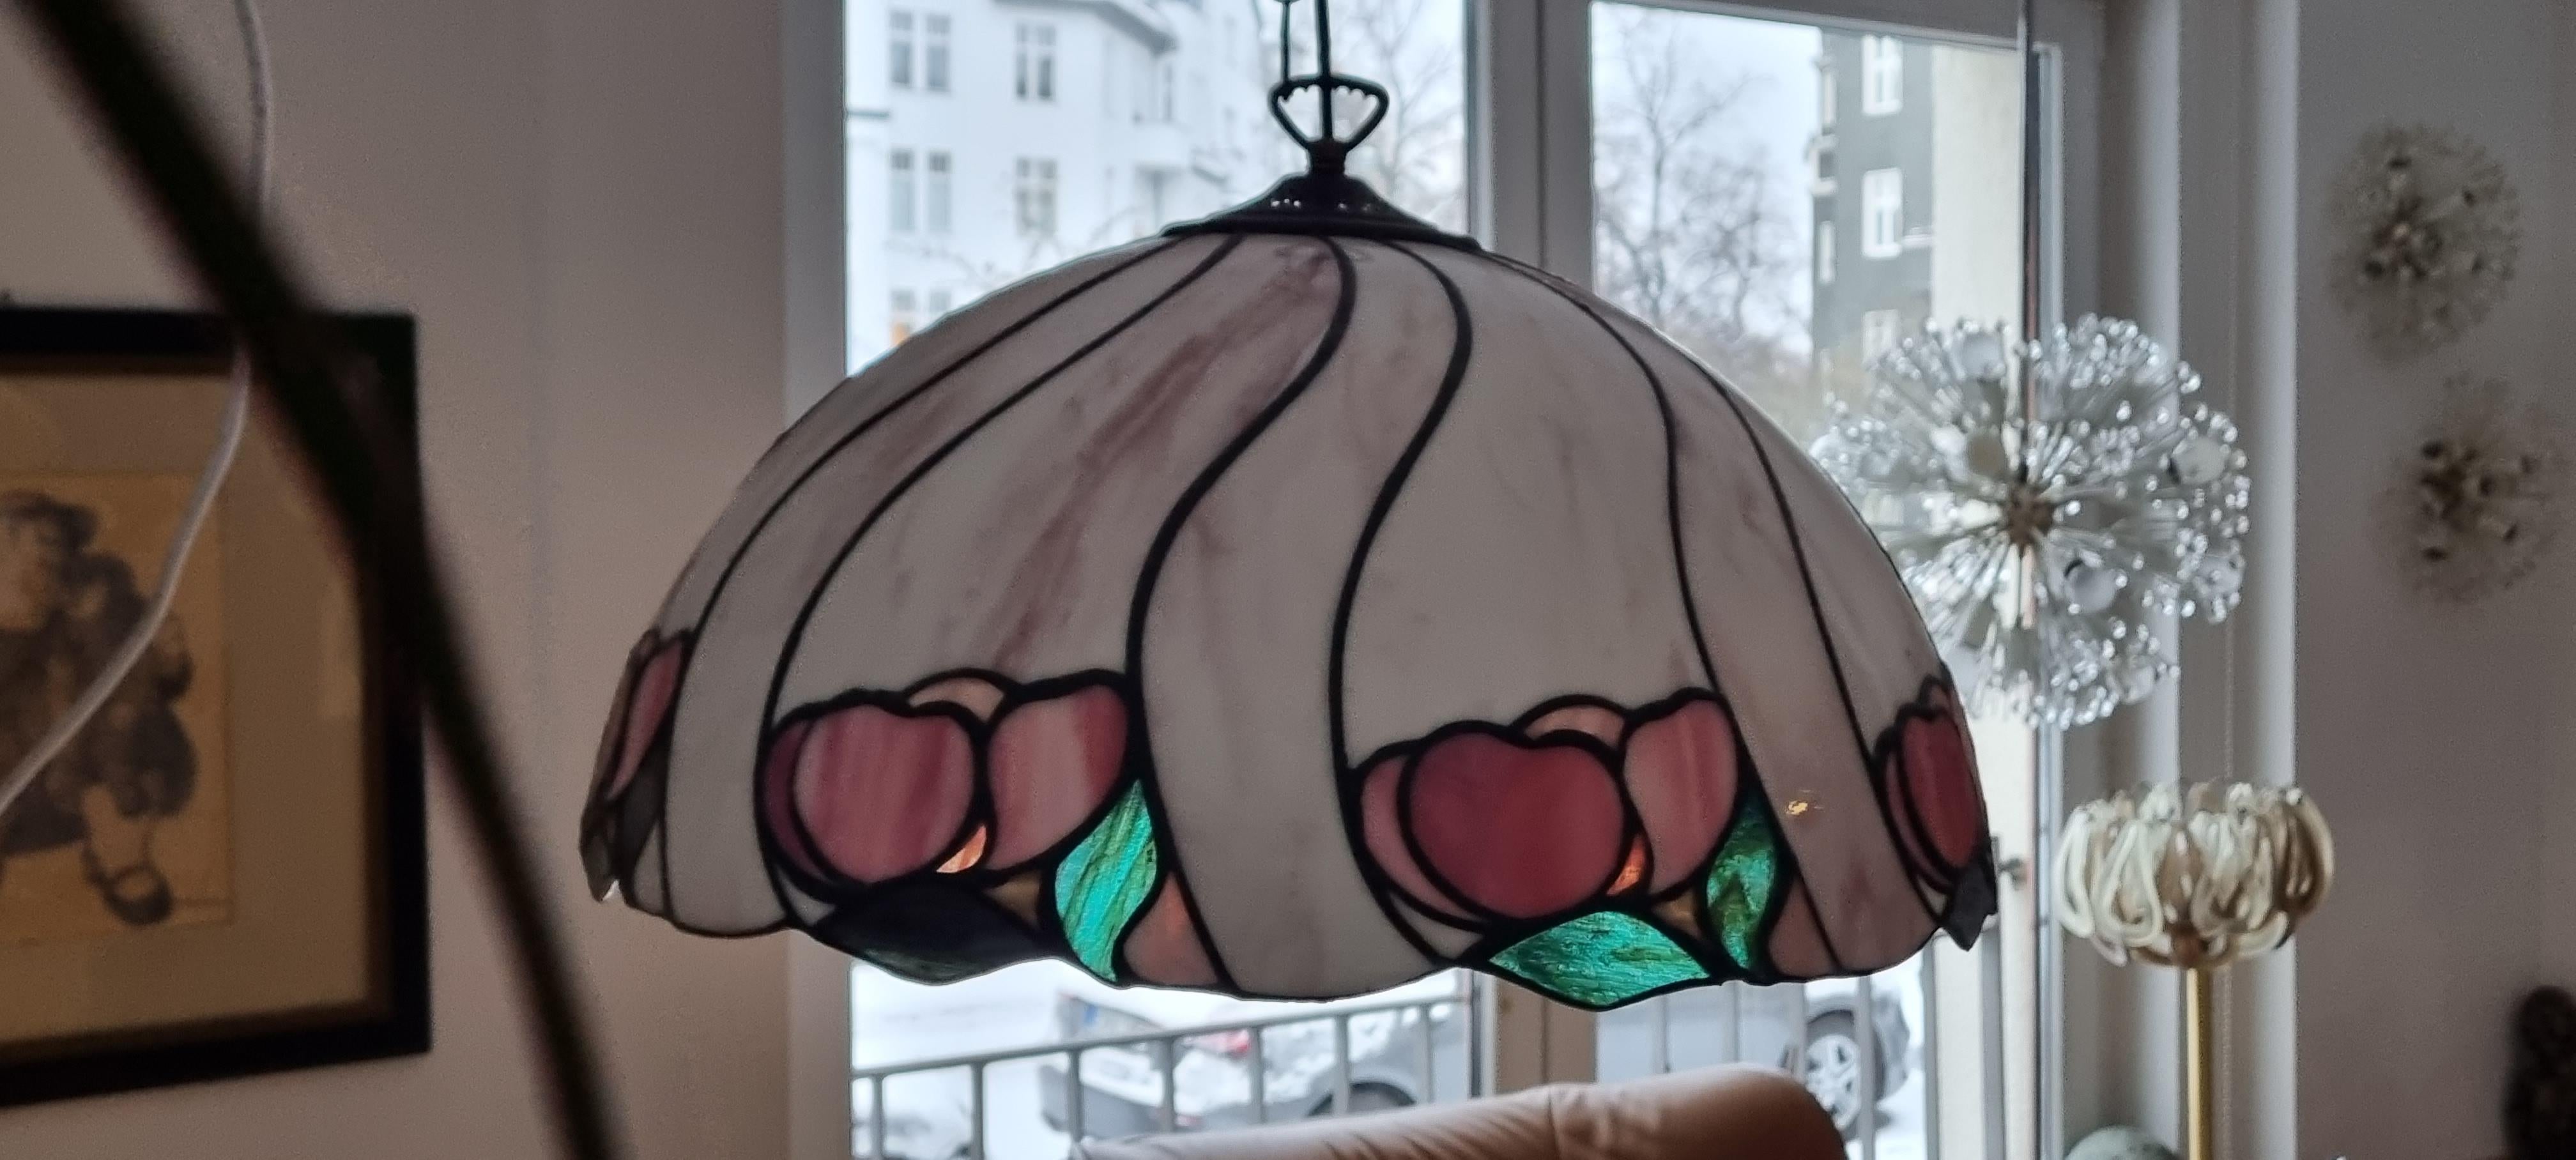 Handmade hanging lamp made of Tiffany glass with holder, chain and ceiling canopy made of patinated brass. E 27 bulb is needed.

Very nice condition, no damages.